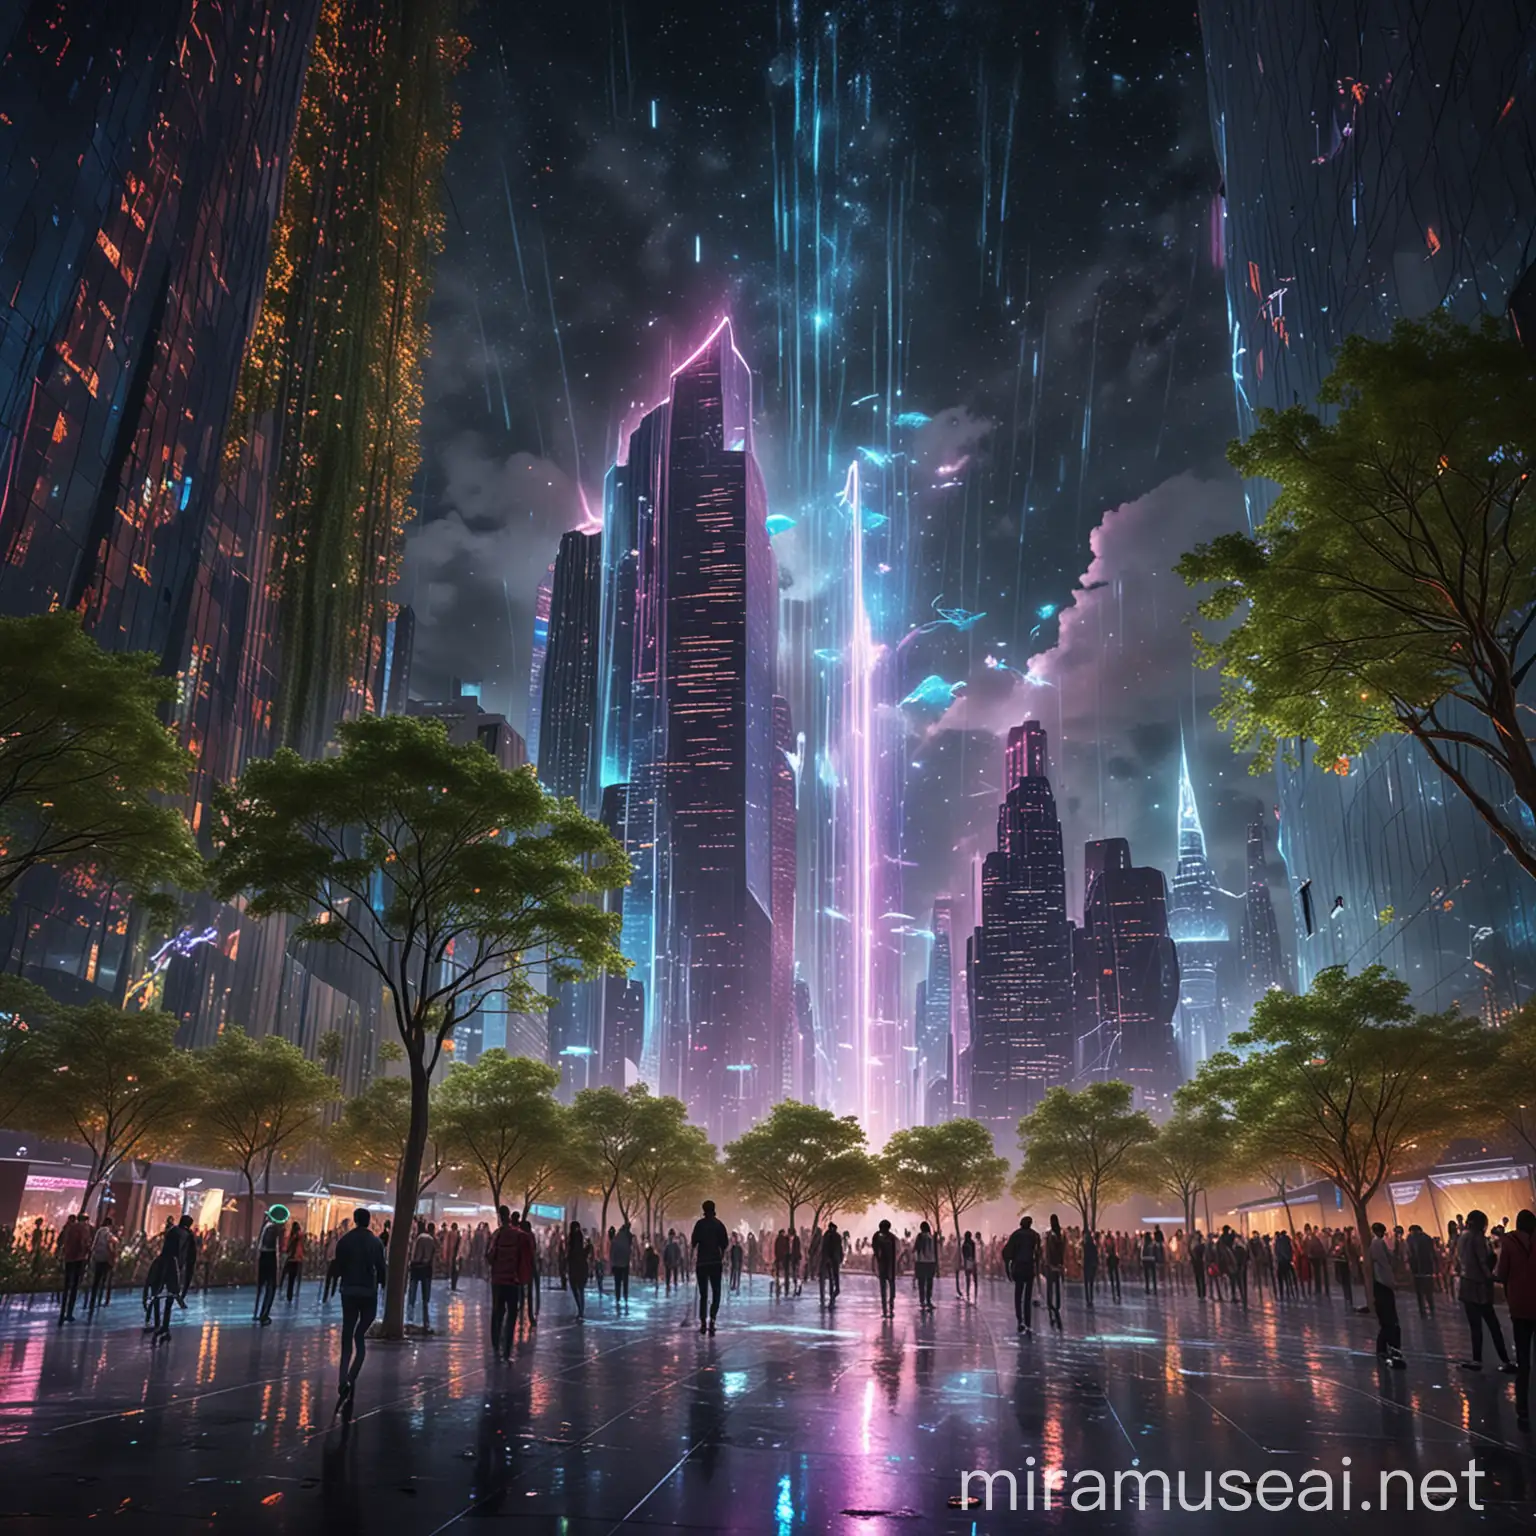 Futuristic City in the Clouds Neonlit Skyscrapers and Bioluminescent Parks